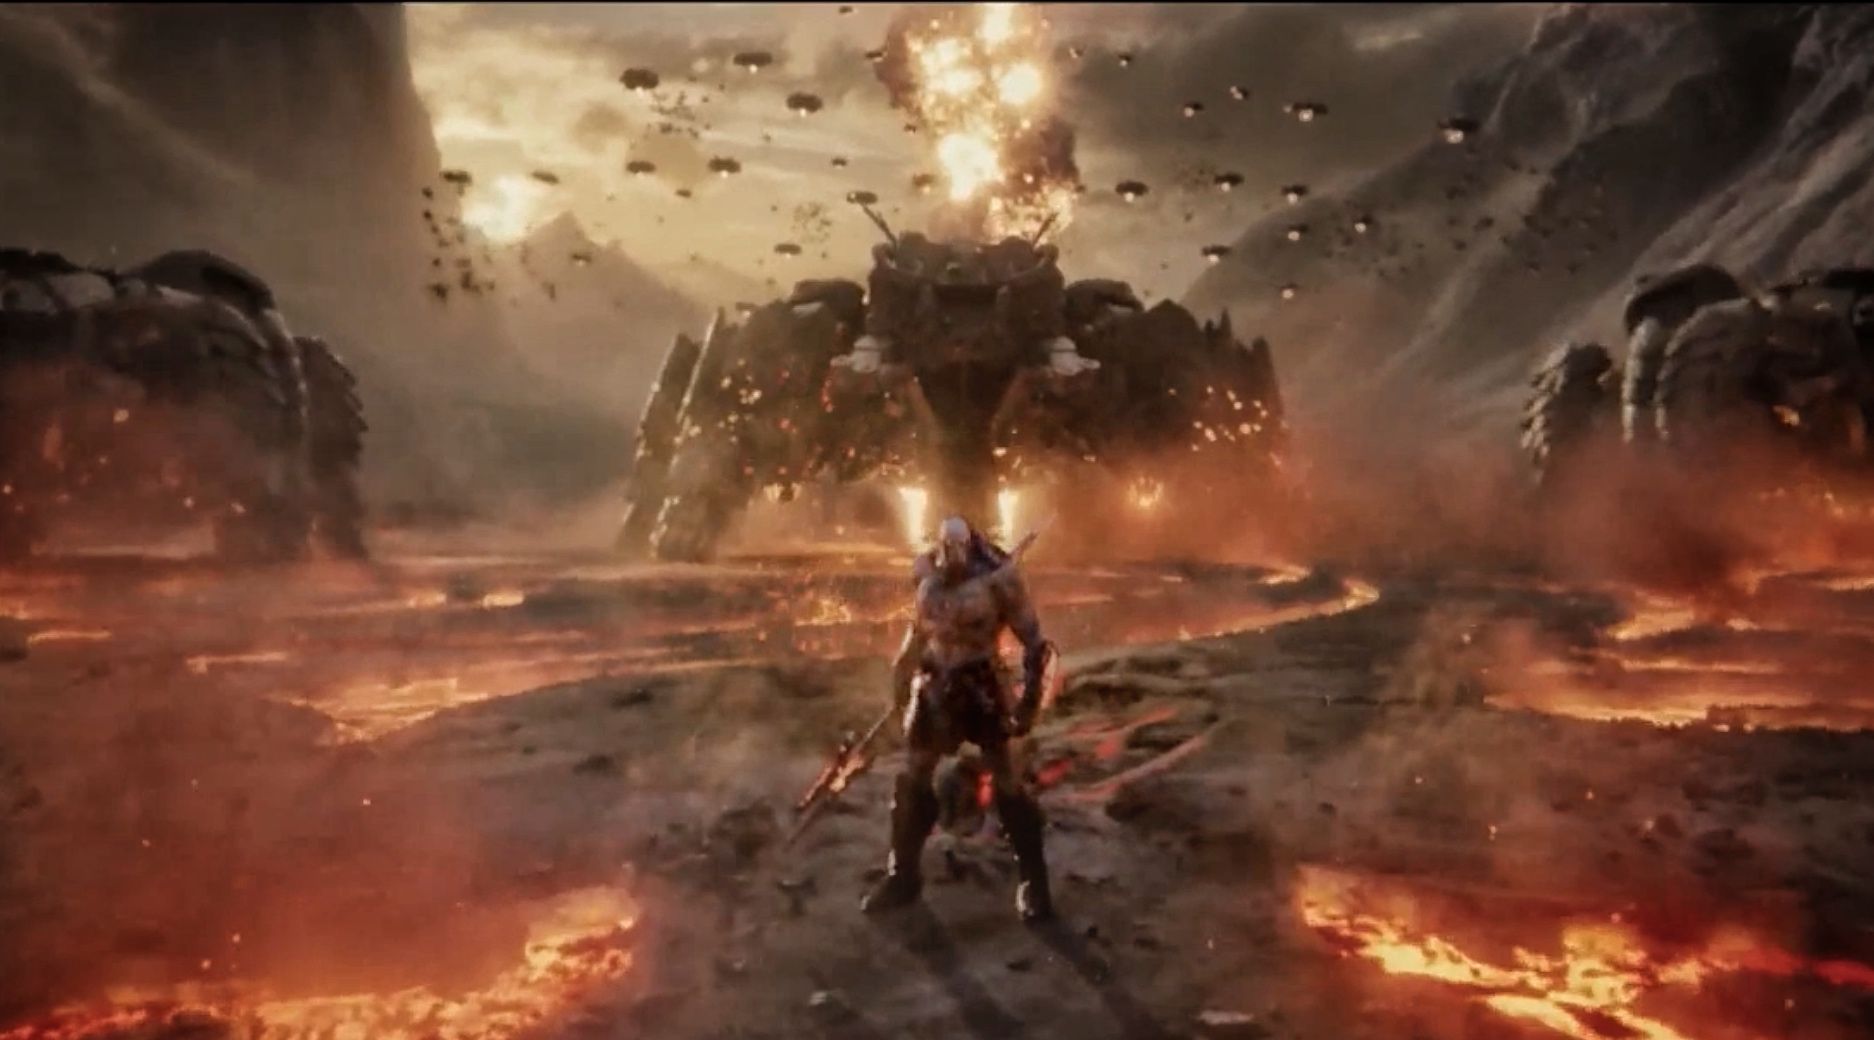 Zack Snyder Reveals First Look at Darkseid in 'Justice League'